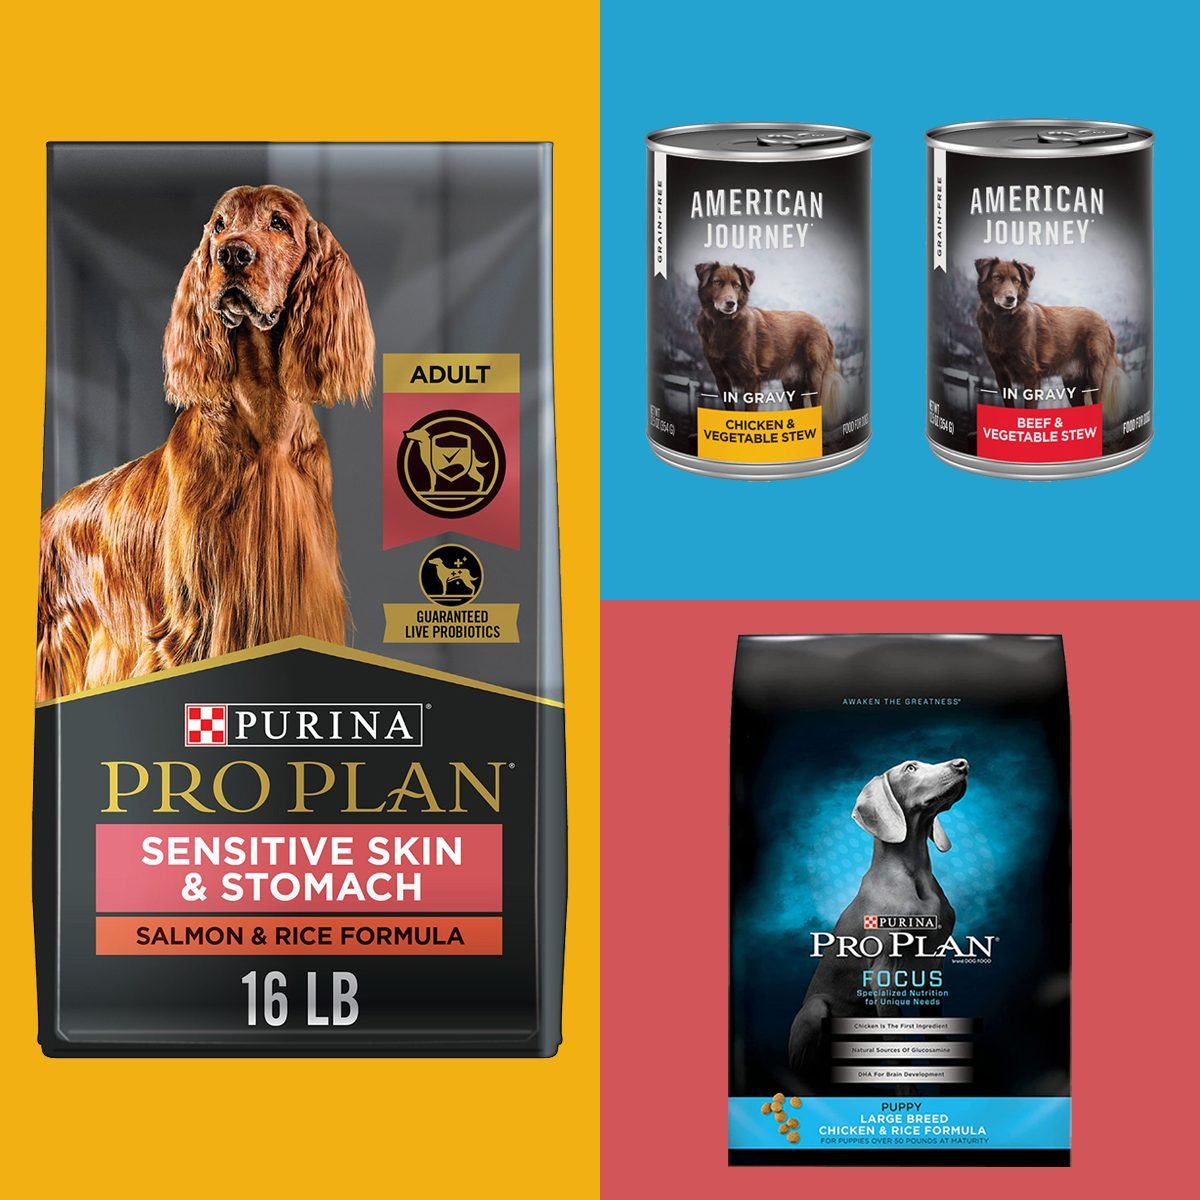 <p>If you have a dog, you know that choosing the right food for them is essential. That's why you might be looking for the <a href="https://www.rd.com/list/natural-dog-food/" rel="noopener noreferrer">best natural dog food</a> or the best grain-free food for your pet's specific needs. But did you know that size also plays a big role when it comes to the <a href="https://www.rd.com/list/best-diet-for-dogs-according-to-vets/">best diet for your dog</a>? Well, it does, which is why you want to be smart about choosing the best large breed dog food if you have an oversized fur baby at home. Before we get into the specific vet-approved recommendations, there are a few things you need to know.</p> <h3>What's different about large breed dog food?</h3> <p>It really boils down to calories in relation to your dog's metabolism. "<a href="https://www.rd.com/list/best-dog-food-for-small-dogs/">Smaller breed dogs</a> typically have a higher metabolic rate and actually burn more calories per pound," explains veterinarian Joel Beth Navratik, DVM, former CEO of MRVL Pet Pharmaceuticals. "Large breed puppies need to be calorie-restricted to prevent rapid weight gain." This is especially important because studies show that if a large breed puppy gains too much weight in his first year of life, he will be much more prone to <a href="https://www.rd.com/list/dog-arthritis-symptoms/">arthritis</a> in his later years. For that reason, large breed dog food is usually crafted with fewer calories. It also tends to boast bigger pieces of kibble that help slow down a dog's eating speed.</p> <h3>Should large dog breeds eat a grain-free or a BEG diet?</h3> <p>In case you aren't familiar with the term, a BEG diet is one that consists of boutique, exotic, and grain-free foods. While the FDA hasn't released an official statement about the safety of grain-free diets for dogs, they have released statements over the years in response to reports that link pet foods containing lentils, peas, legumes, and potatoes as main ingredients with canine dilated cardiomyopathy (DCM), a serious heart condition; those ingredients are usually what takes place of the grains in certain foods. Because of this, most pet experts are against grain-free diets. "Large breed dogs typically should not be fed a grain-free diet unless prescribed by their veterinarian," Dr. Navratik explains. Other veterinarians note that many BEG diets aren't formulated to meet the specific nutrient needs of large breed dogs.</p> <h3>What should you look for in large breed dog food?</h3> <p>You should take several factors into consideration, including your dog's age, breed, size, and activity level. For instance, large breed puppy foods should have a good amount of protein. "They should have 30 percent protein and 9 percent fat on a dry matter (DM) basis in addition to calcium amounts up to 1.5 percent and phosphorus around 0.8 to 1 percent DM," explains Michelle Burch, DVM, a veterinarian with Safe Hounds Pet Insurance. "Large breed puppy foods should also not be fed to a dog in all its life stages."</p> <p>For adult dogs, you'll need a diet that provides a balanced ratio of fats, carbohydrates, and proteins. "Pay close attention to the labels on dog food and look for foods labeled 'complete and balanced,' which is the best indicator that a food has all the necessary nutrients,” says George Melillo, DVM, Chief Veterinary Officer and cofounder of Heart + Paw. Beyond that, of course, you’ll want to take your dog’s special needs and preferences into consideration, as well as consult your vet. The expert-approved picks on this list will get you off to a good start and <a href="https://www.rd.com/article/tips-help-pet-live-longer/">help your dog live a long, healthy life</a>.</p>